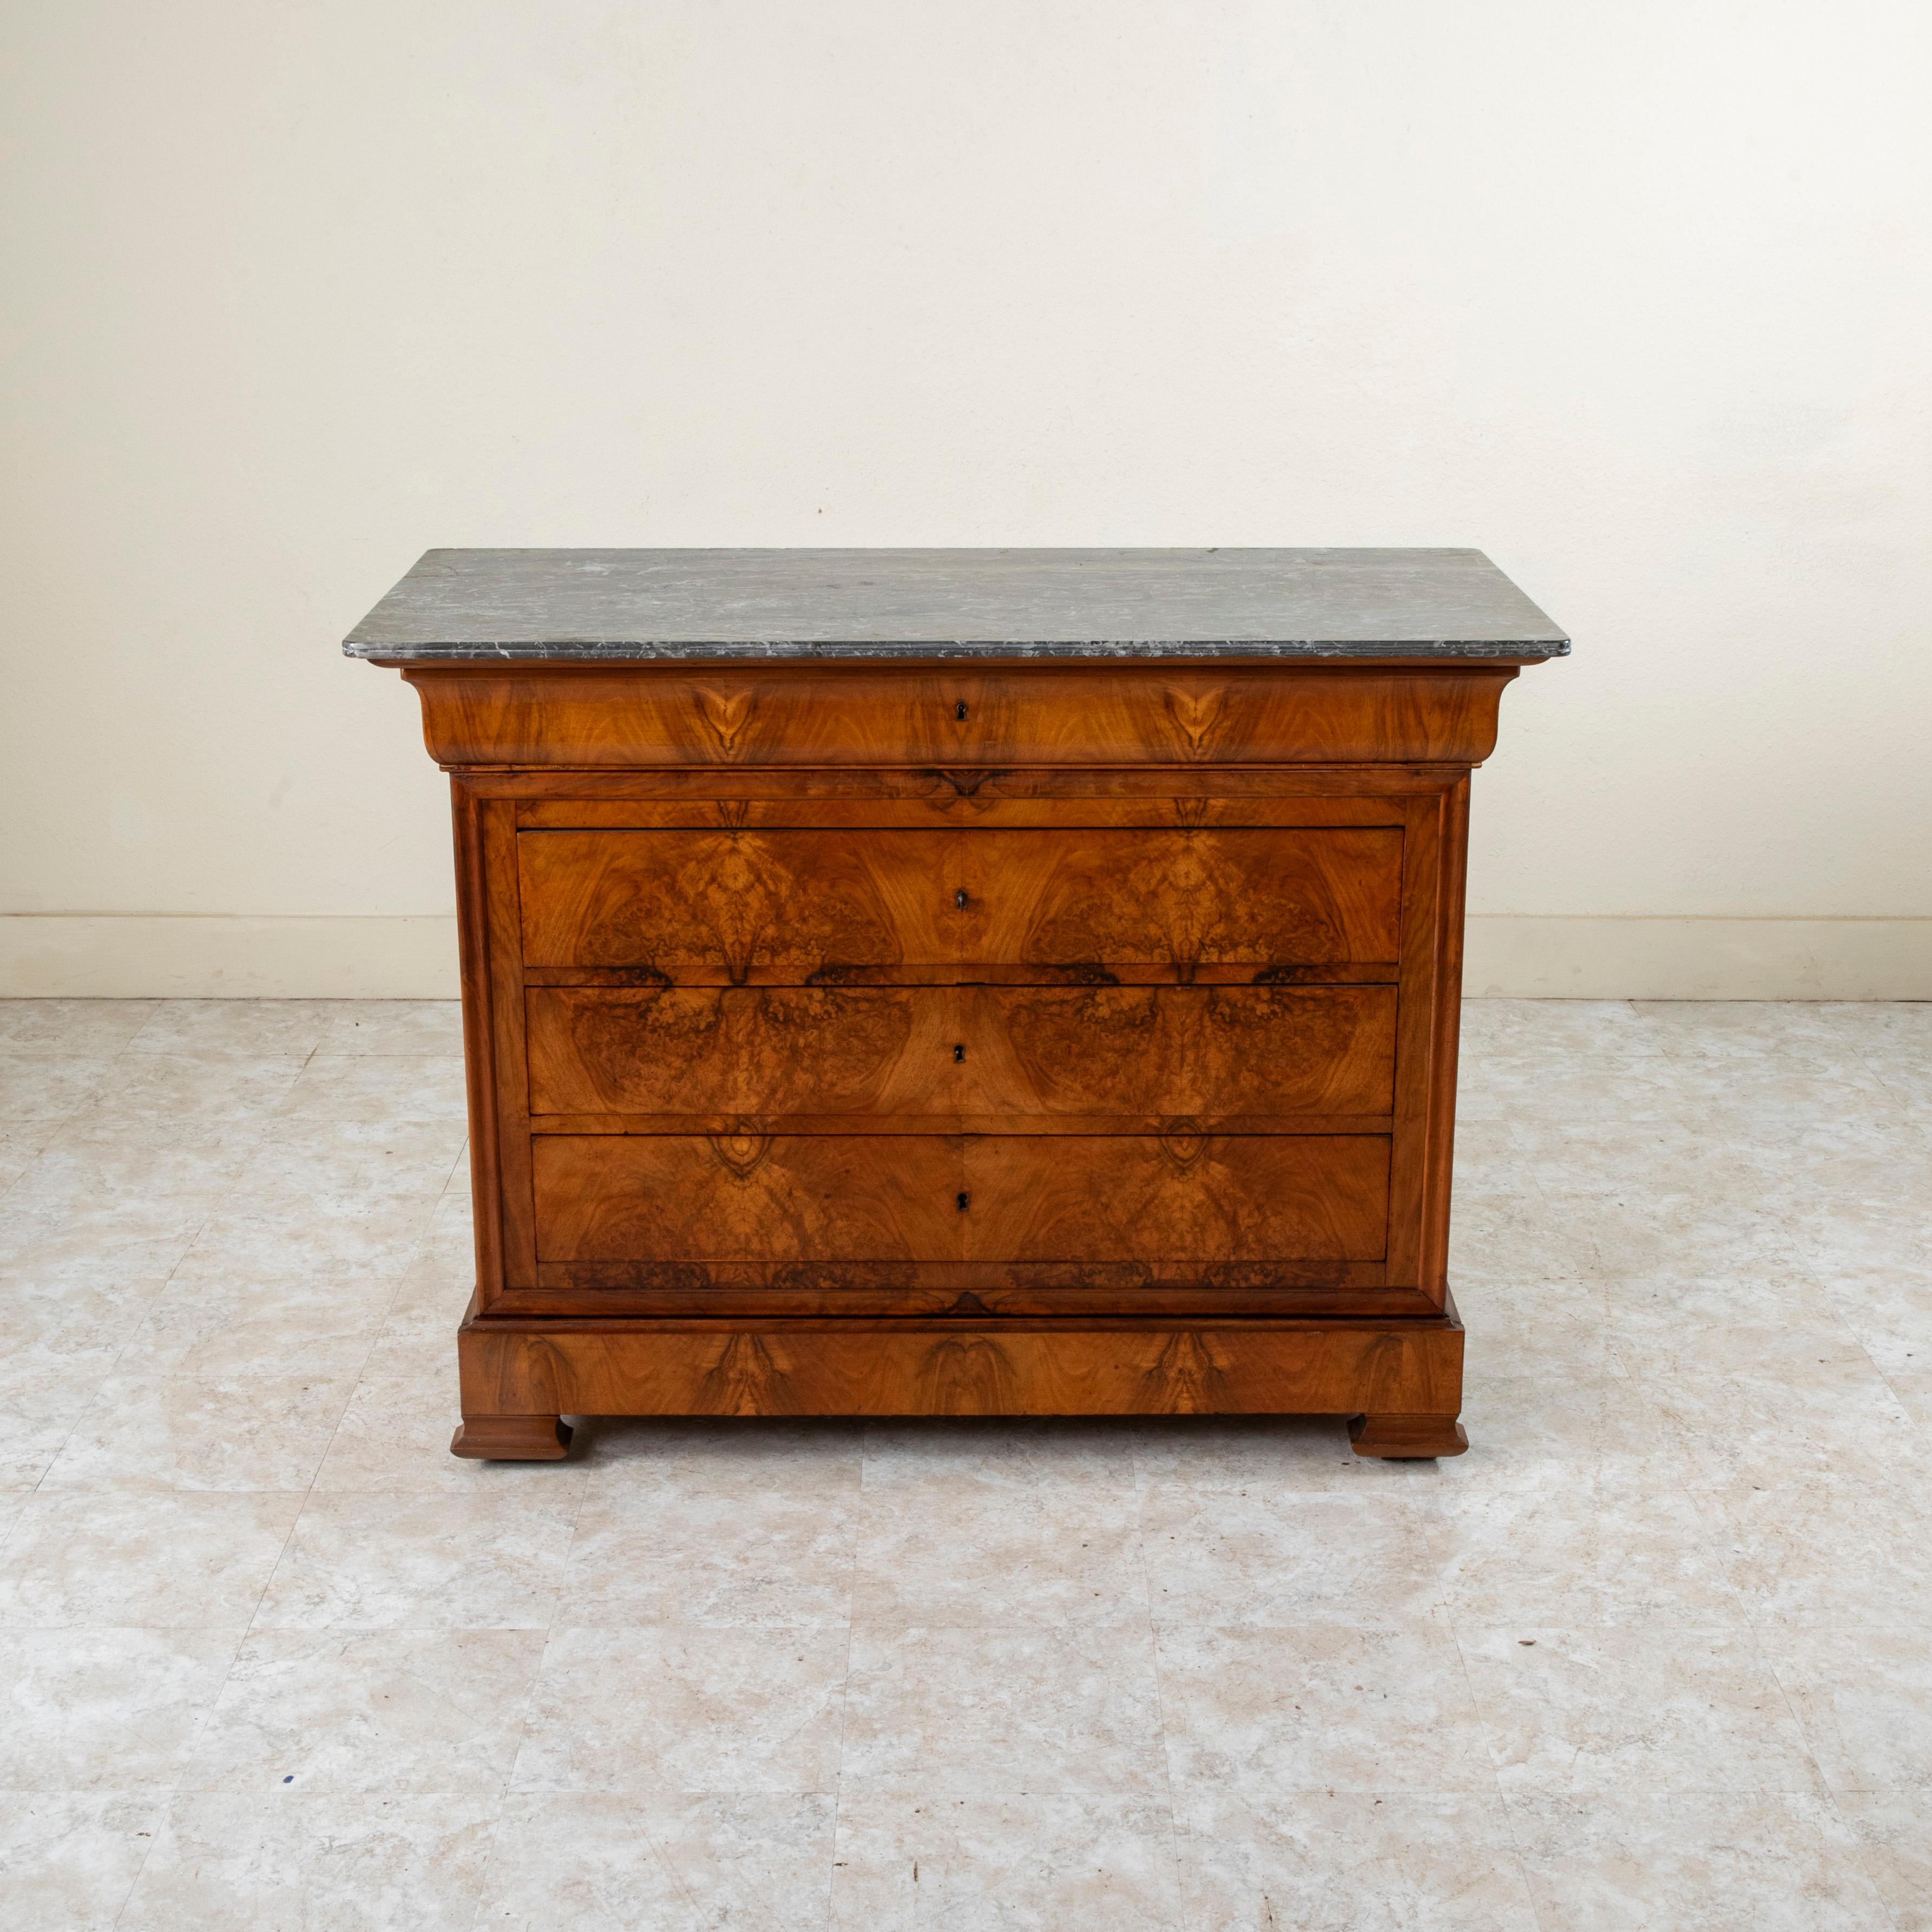 This quintessential Louis Philippe period commode or chest of drawers displays the exemplary craftsmanship of the early nineteenth century with a facade of book matched burl walnut and solid walnut panel sides. The piece is capped with a double